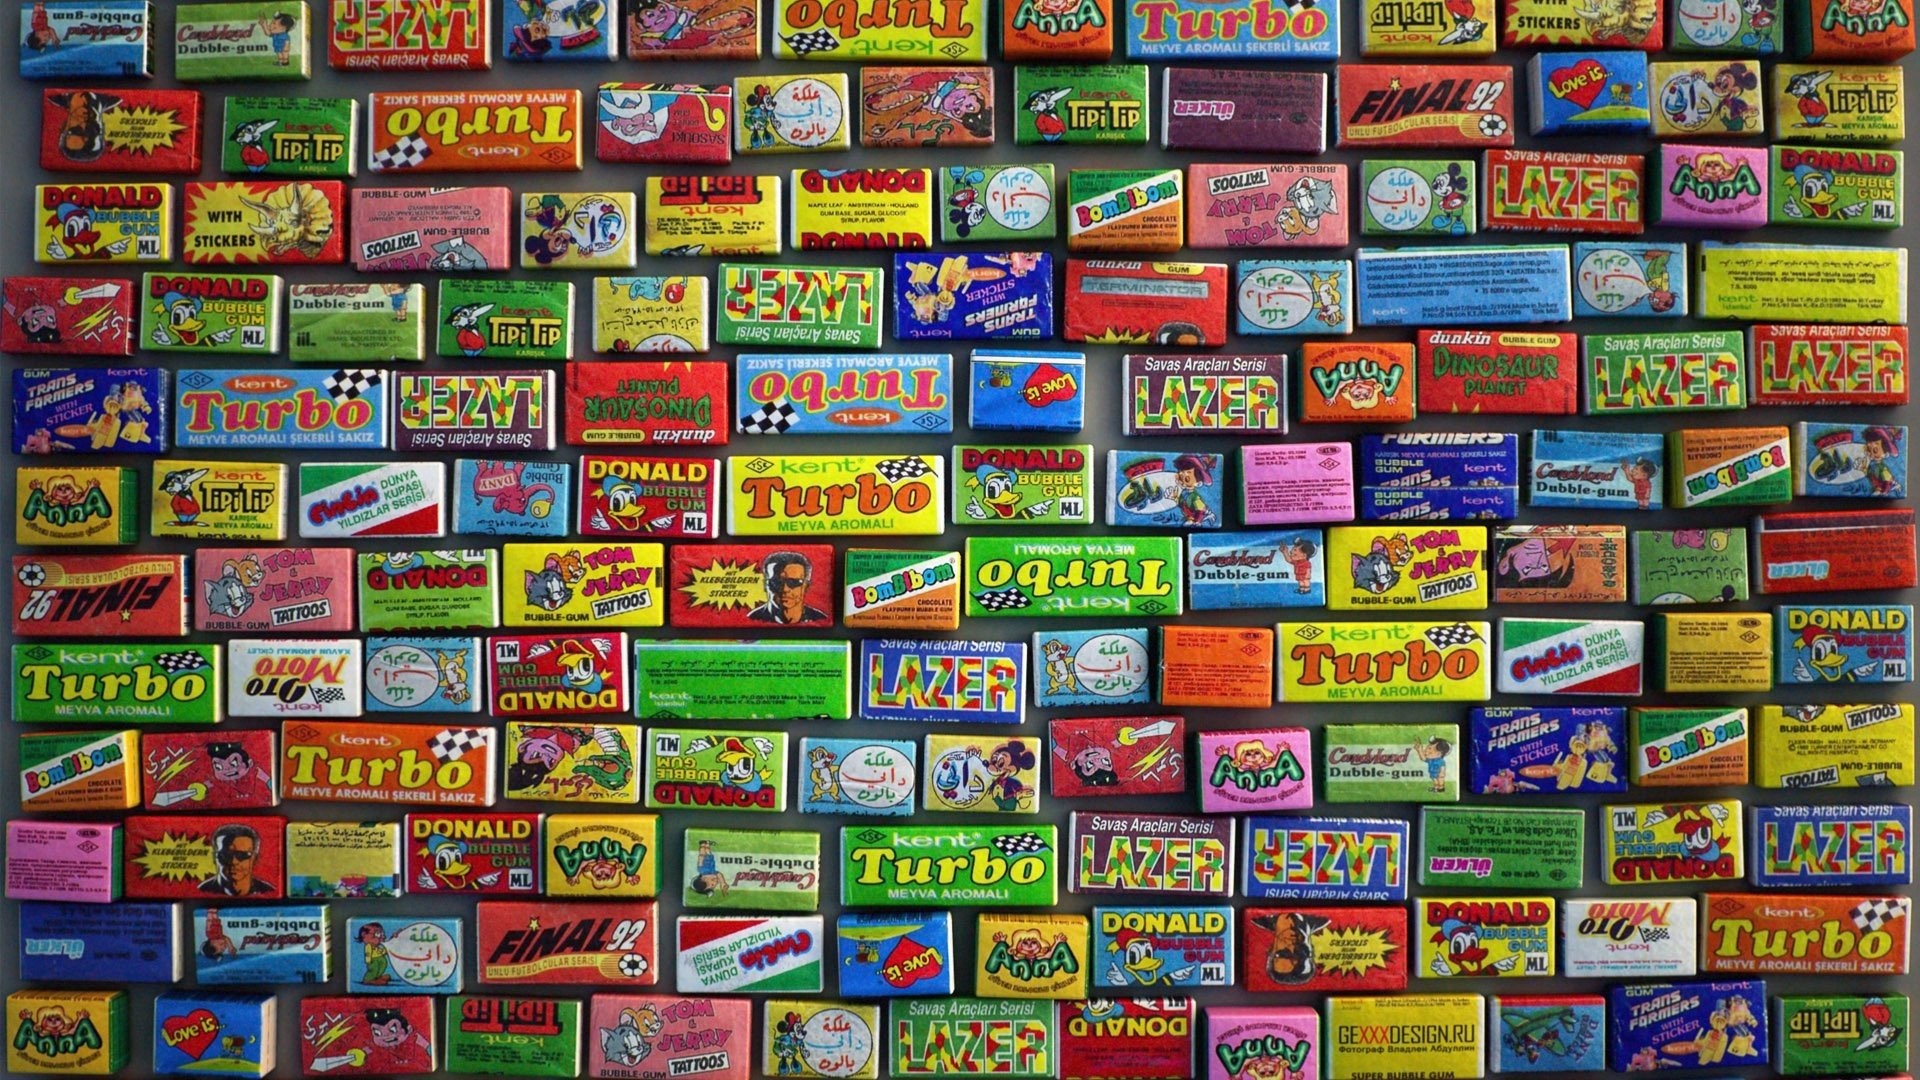 Gum 80s Background Cool Image 4k Amazing Tablet